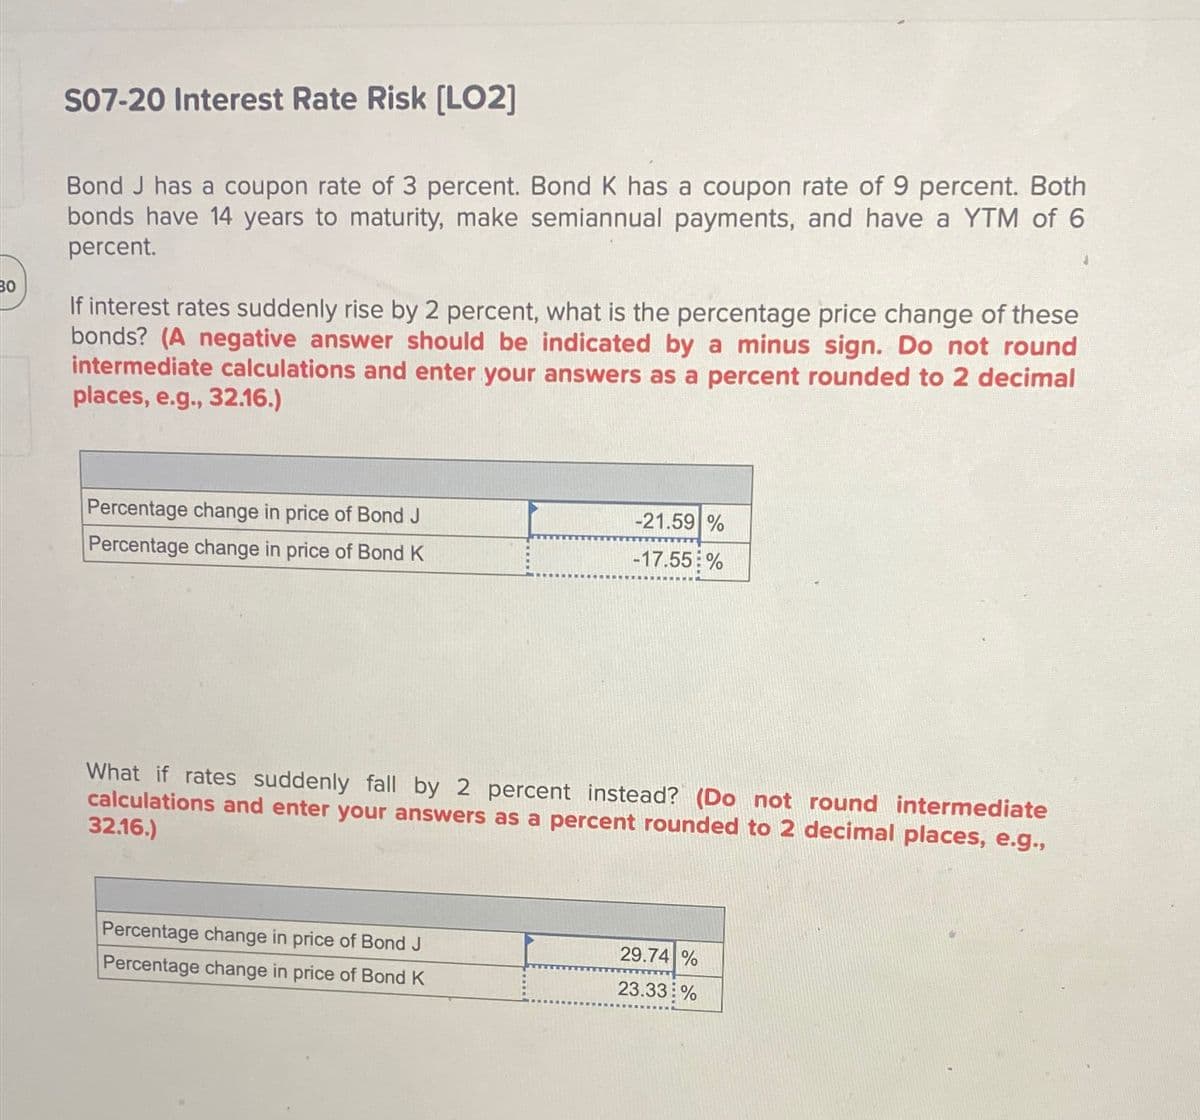 30
S07-20 Interest Rate Risk [LO2]
Bond J has a coupon rate of 3 percent. Bond K has a coupon rate of 9 percent. Both
bonds have 14 years to maturity, make semiannual payments, and have a YTM of 6
percent.
If interest rates suddenly rise by 2 percent, what is the percentage price change of these
bonds? (A negative answer should be indicated by a minus sign. Do not round
intermediate calculations and enter your answers as a percent rounded to 2 decimal
places, e.g., 32.16.)
Percentage change in price of Bond J
Percentage change in price of Bond K
-21.59%
-17.55%
What if rates suddenly fall by 2 percent instead? (Do not round intermediate
calculations and enter your answers as a percent rounded to 2 decimal places, e.g.,
32.16.)
Percentage change in price of Bond J
Percentage change in price of Bond K
29.74 %
23.33%